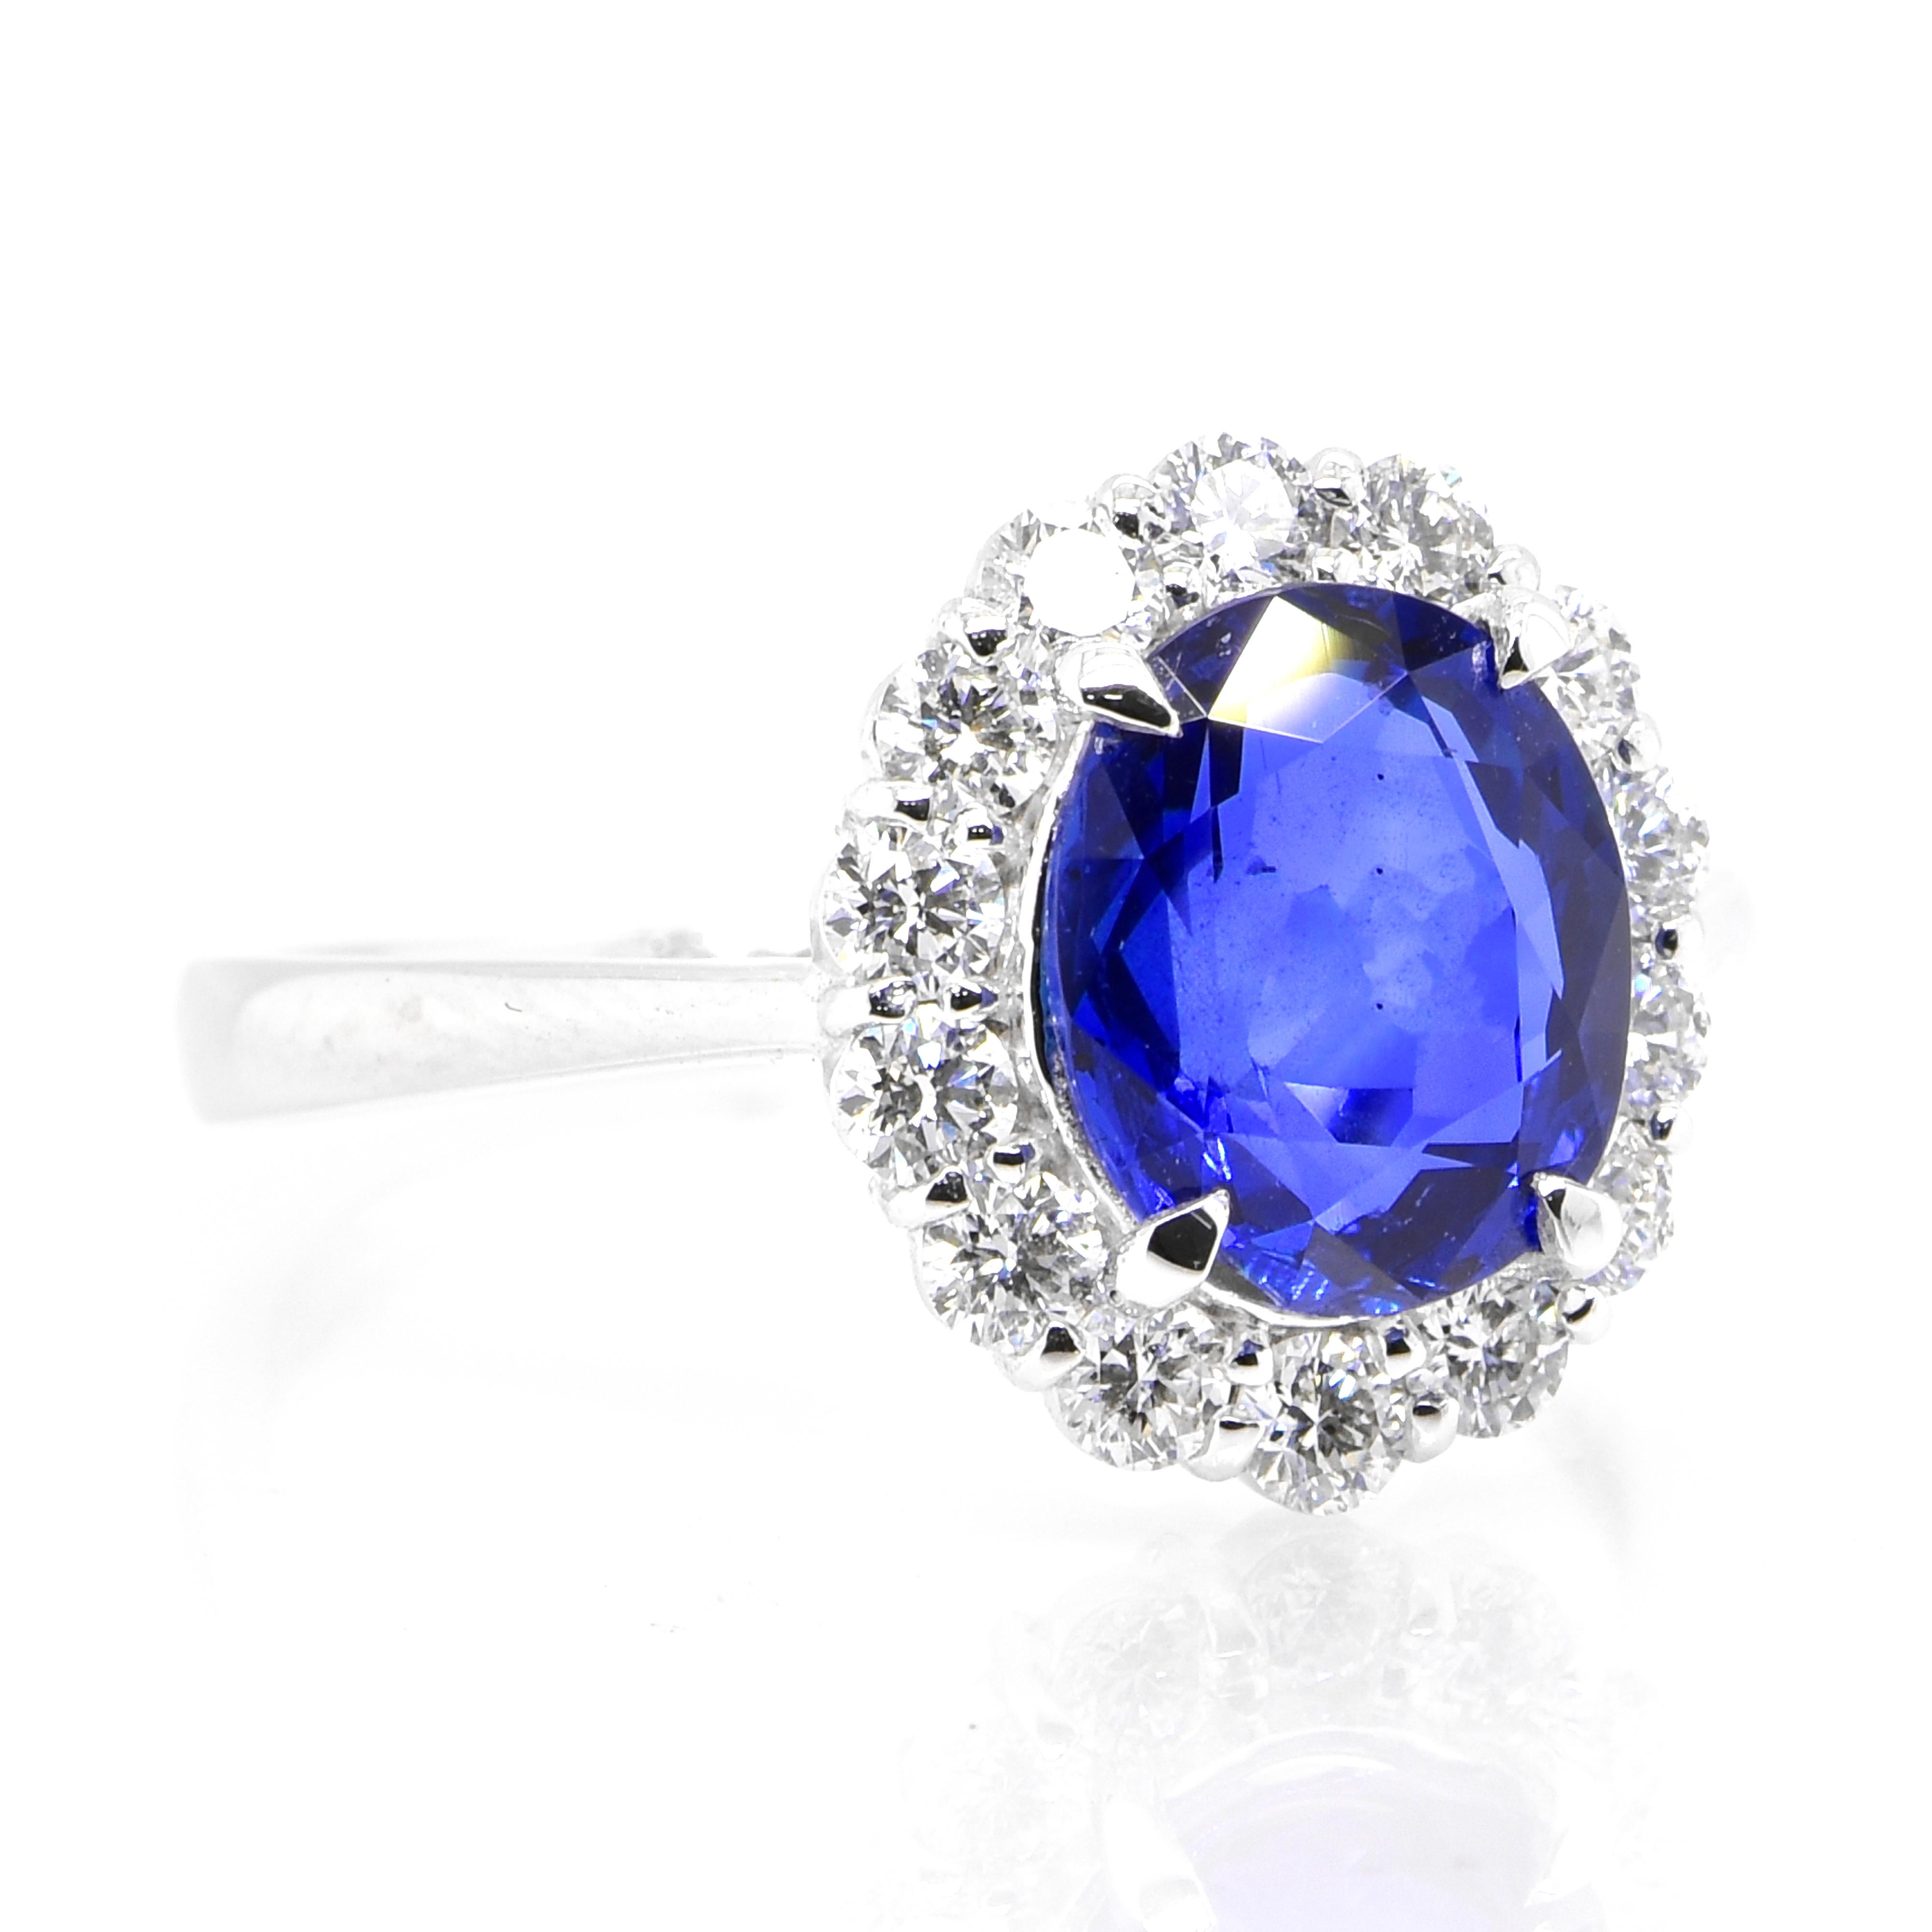 Modern 2.39 Carat Natural, Unheated, Ceylon Sapphire and Diamond Ring Made in Platinum For Sale